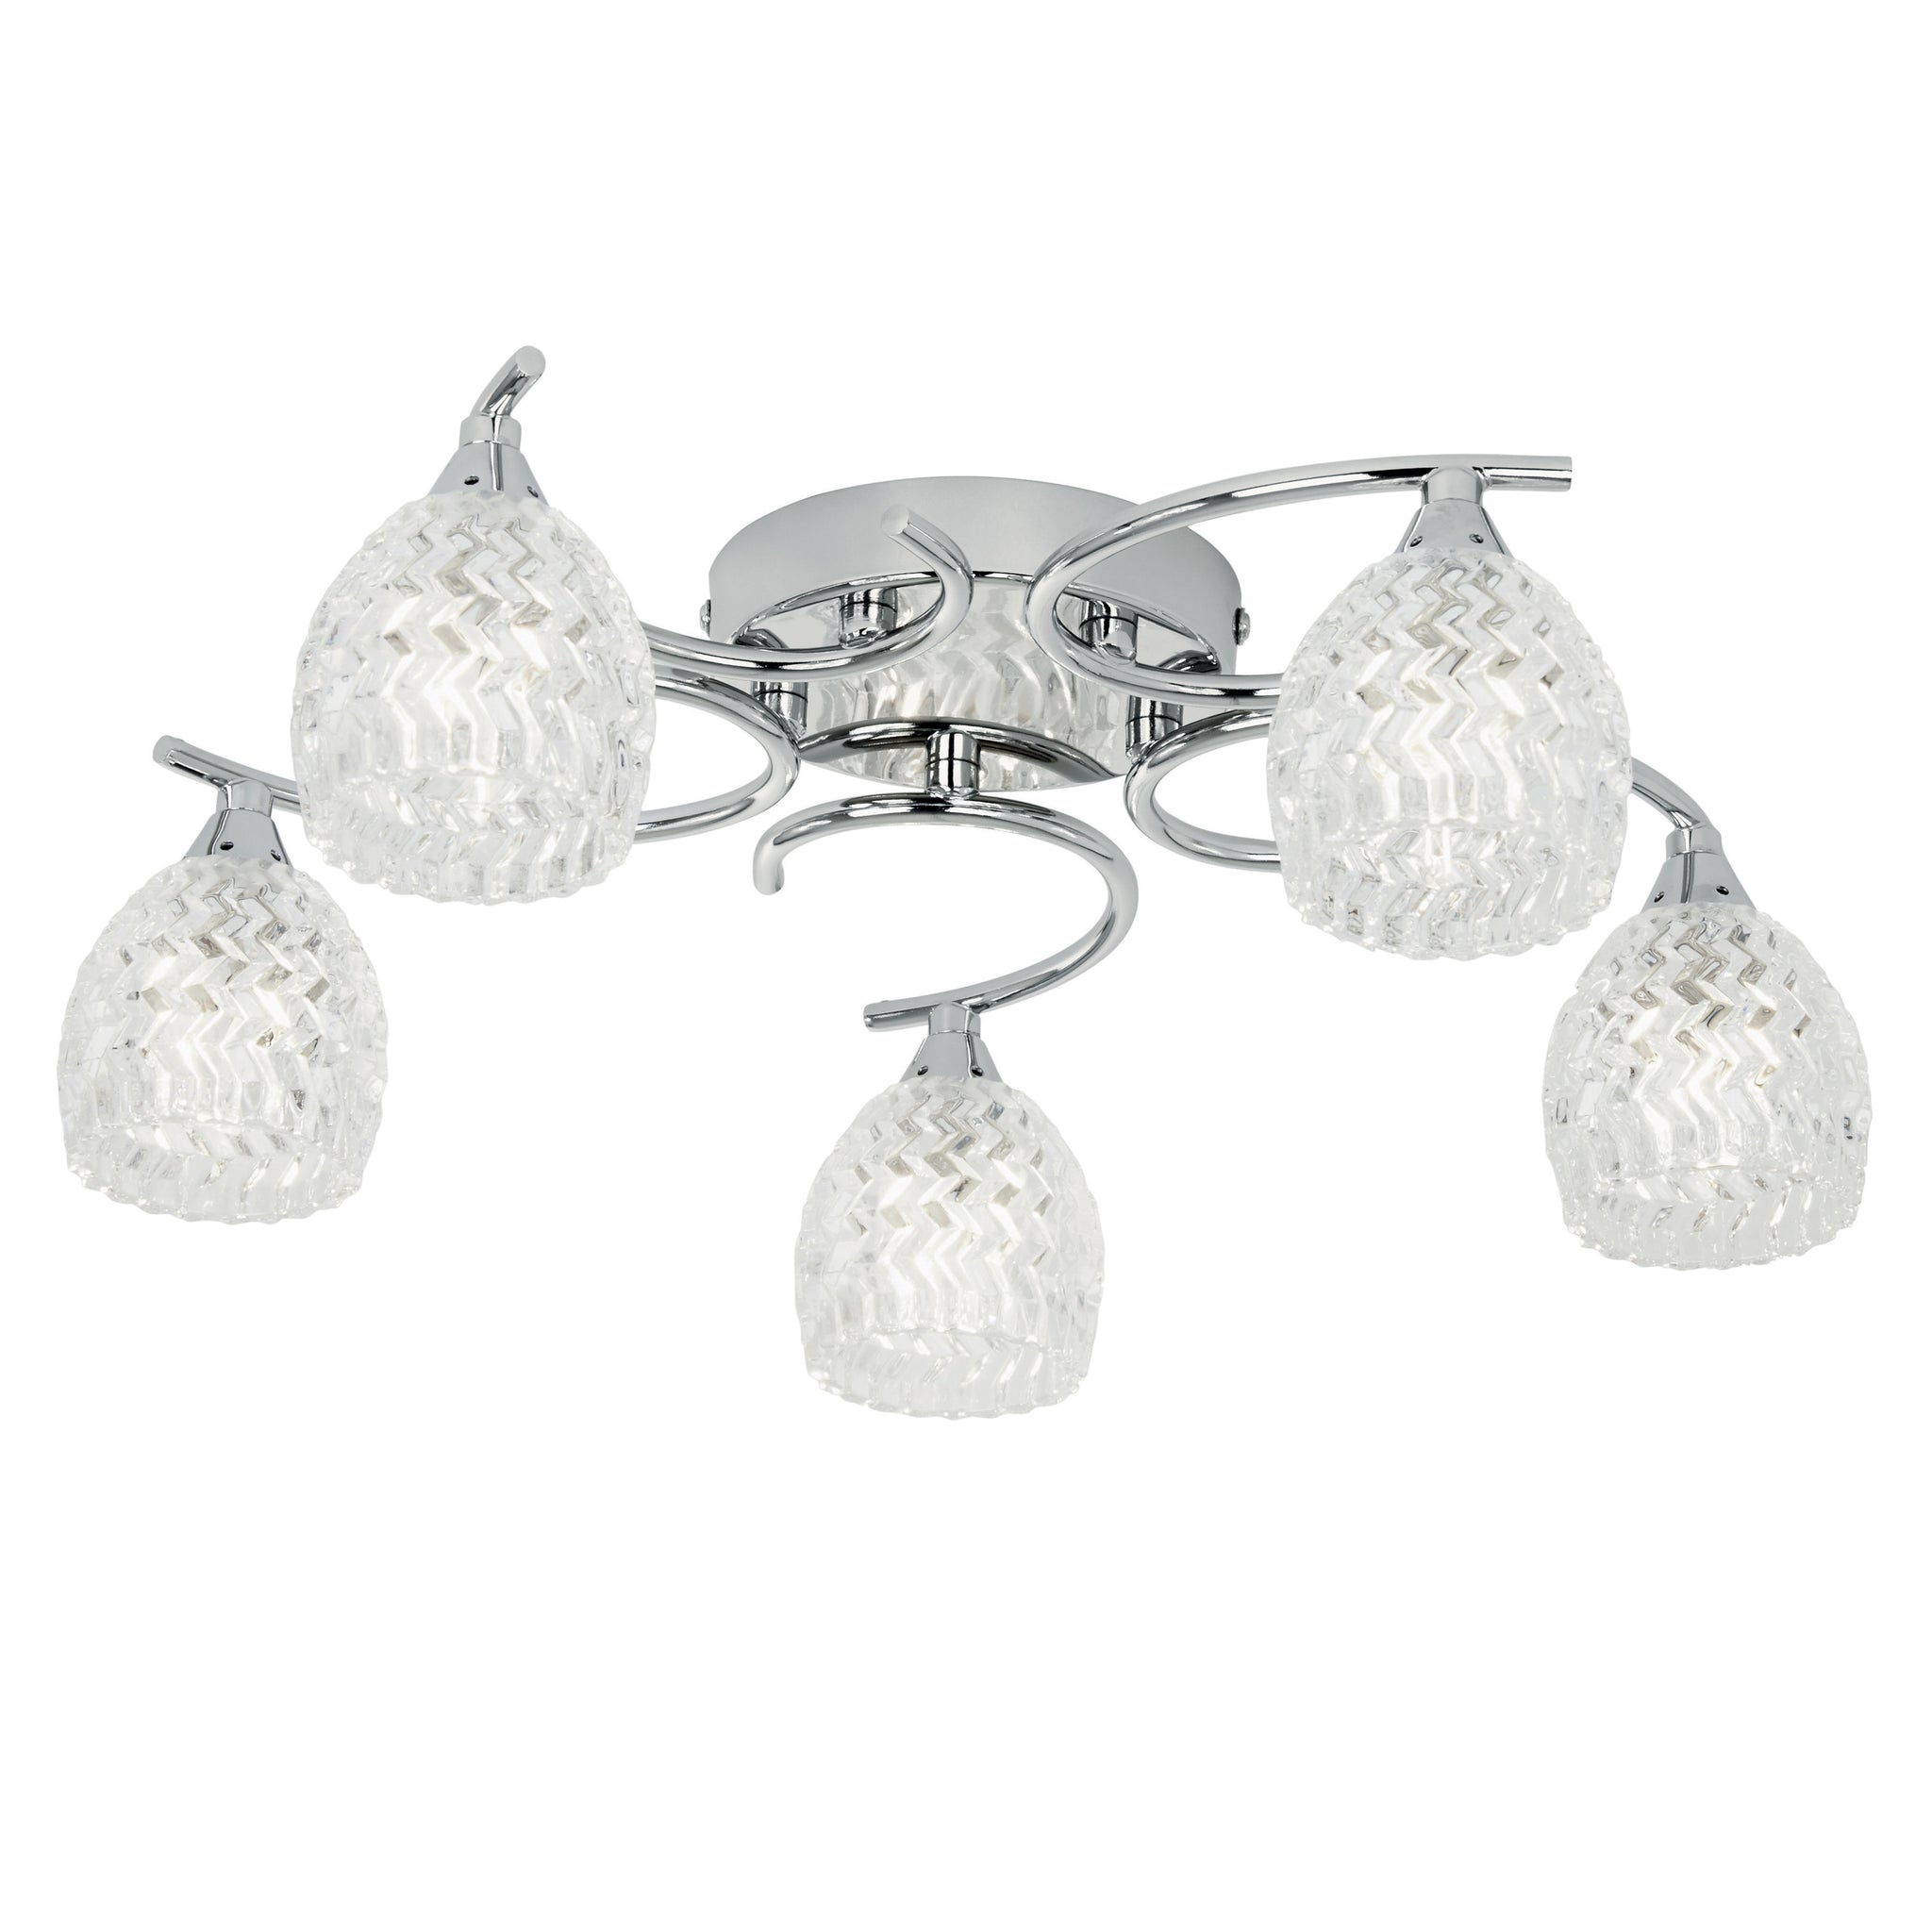 Bowyer 5 Ceiling Lamp Chrome